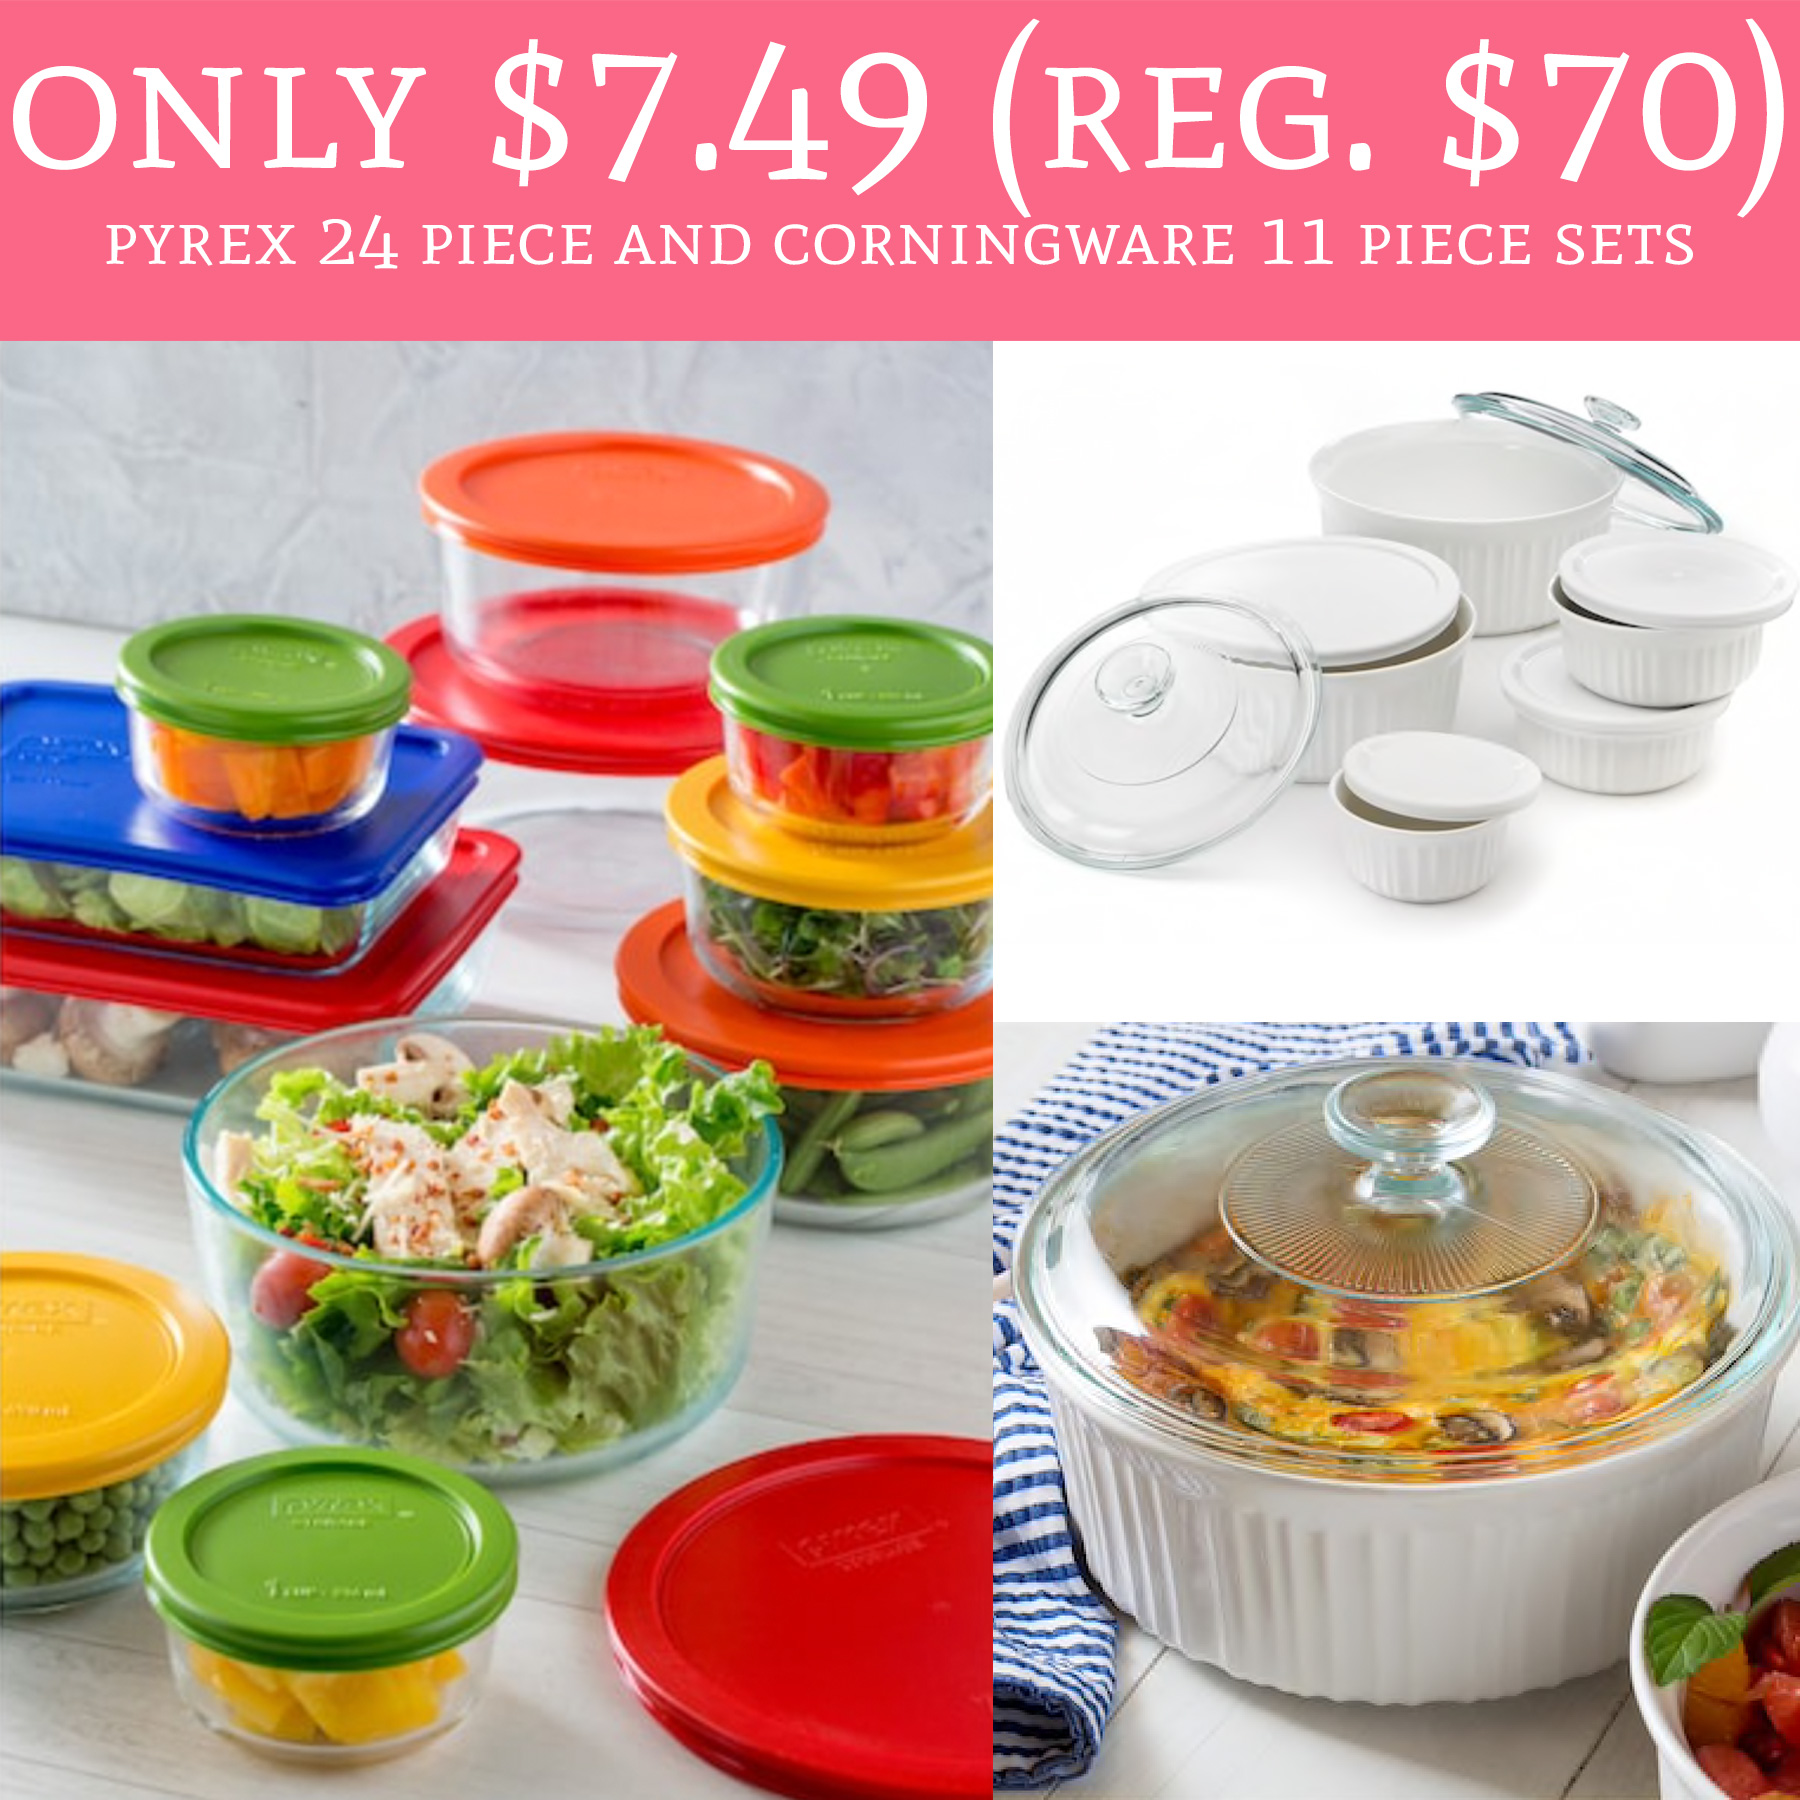 pyrex-24-piece-and-corning-ware-11-piece-sets-1